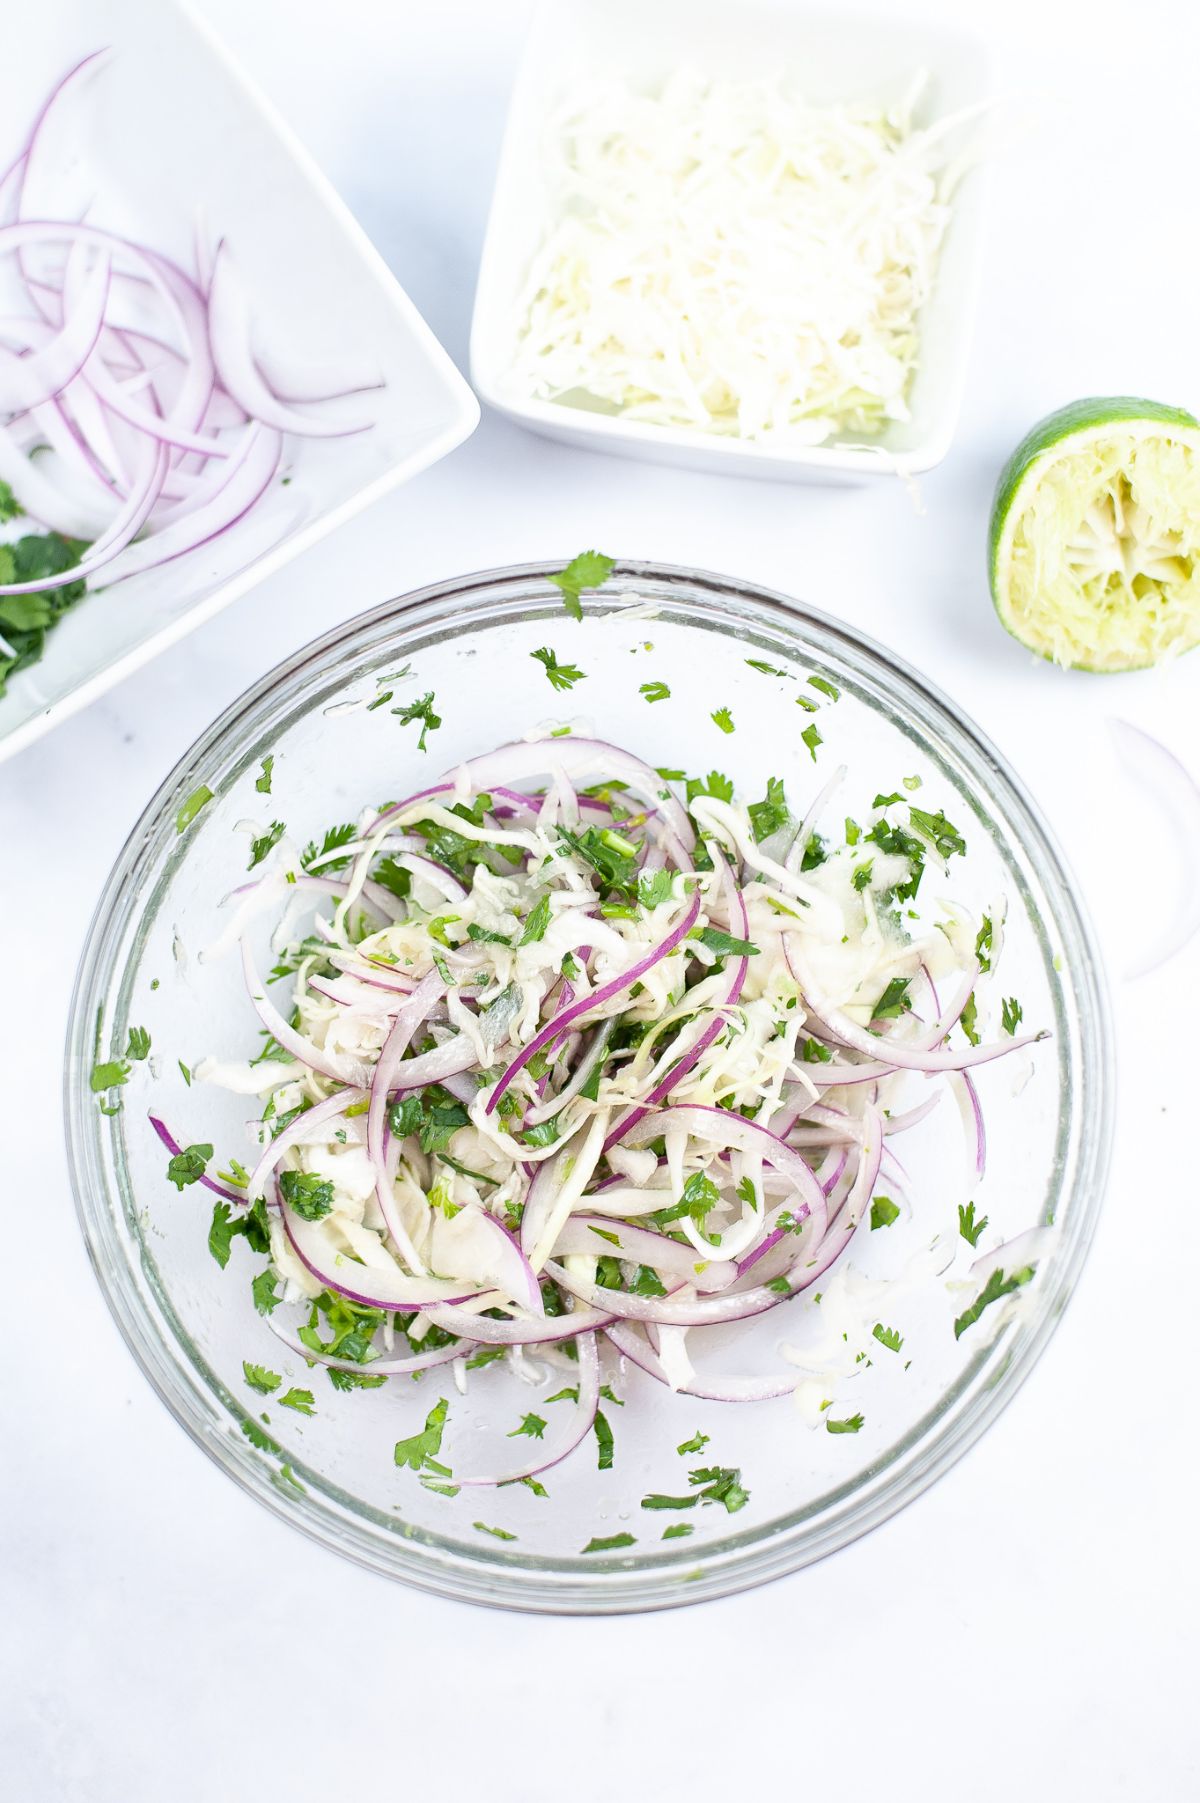 Shredded cabbage, onion and cilantro in a glass bowl